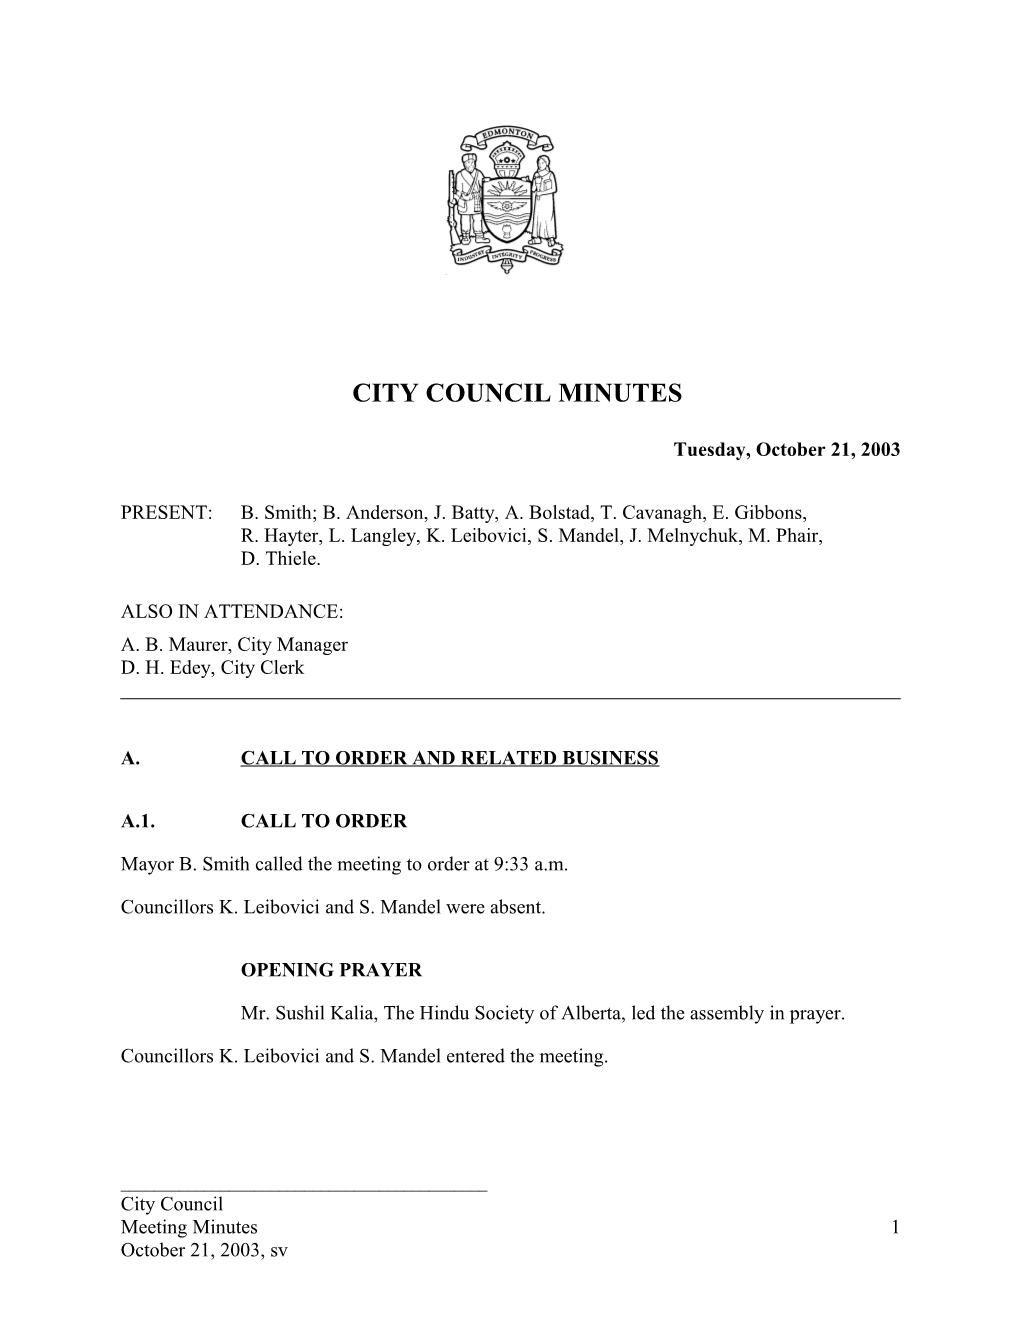 Minutes for City Council October 21, 2003 Meeting